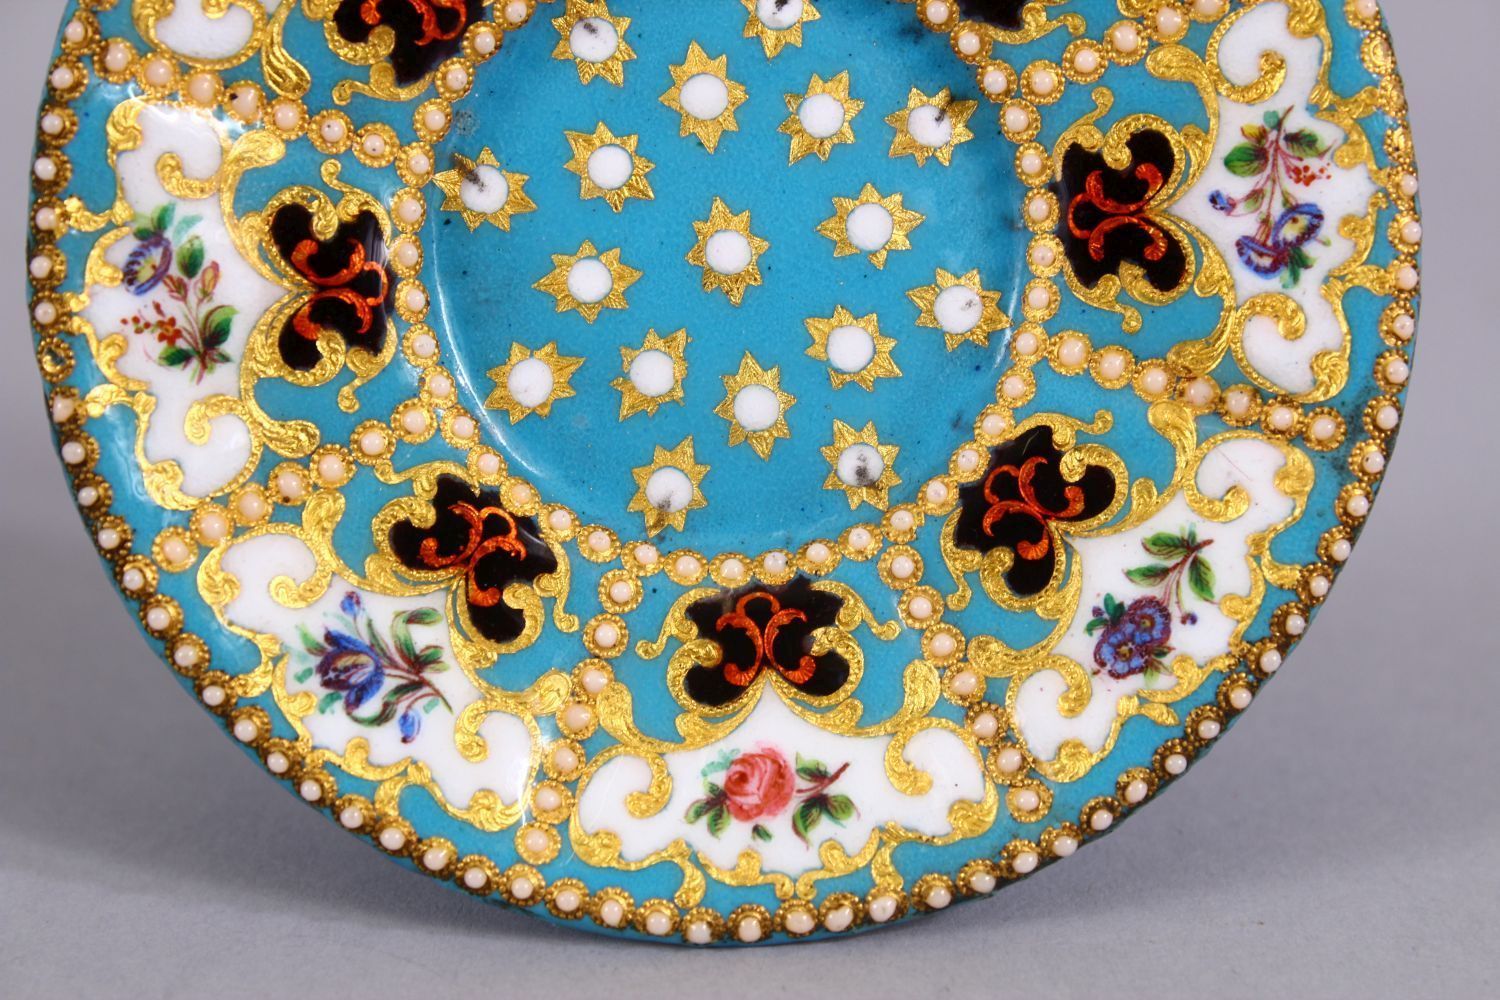 A FINE 19TH CENTURY OTTOMAN OR OTTOMAN MARKET ENAMELLED CUP AND SAUCER, with finely painted panels - Image 6 of 8